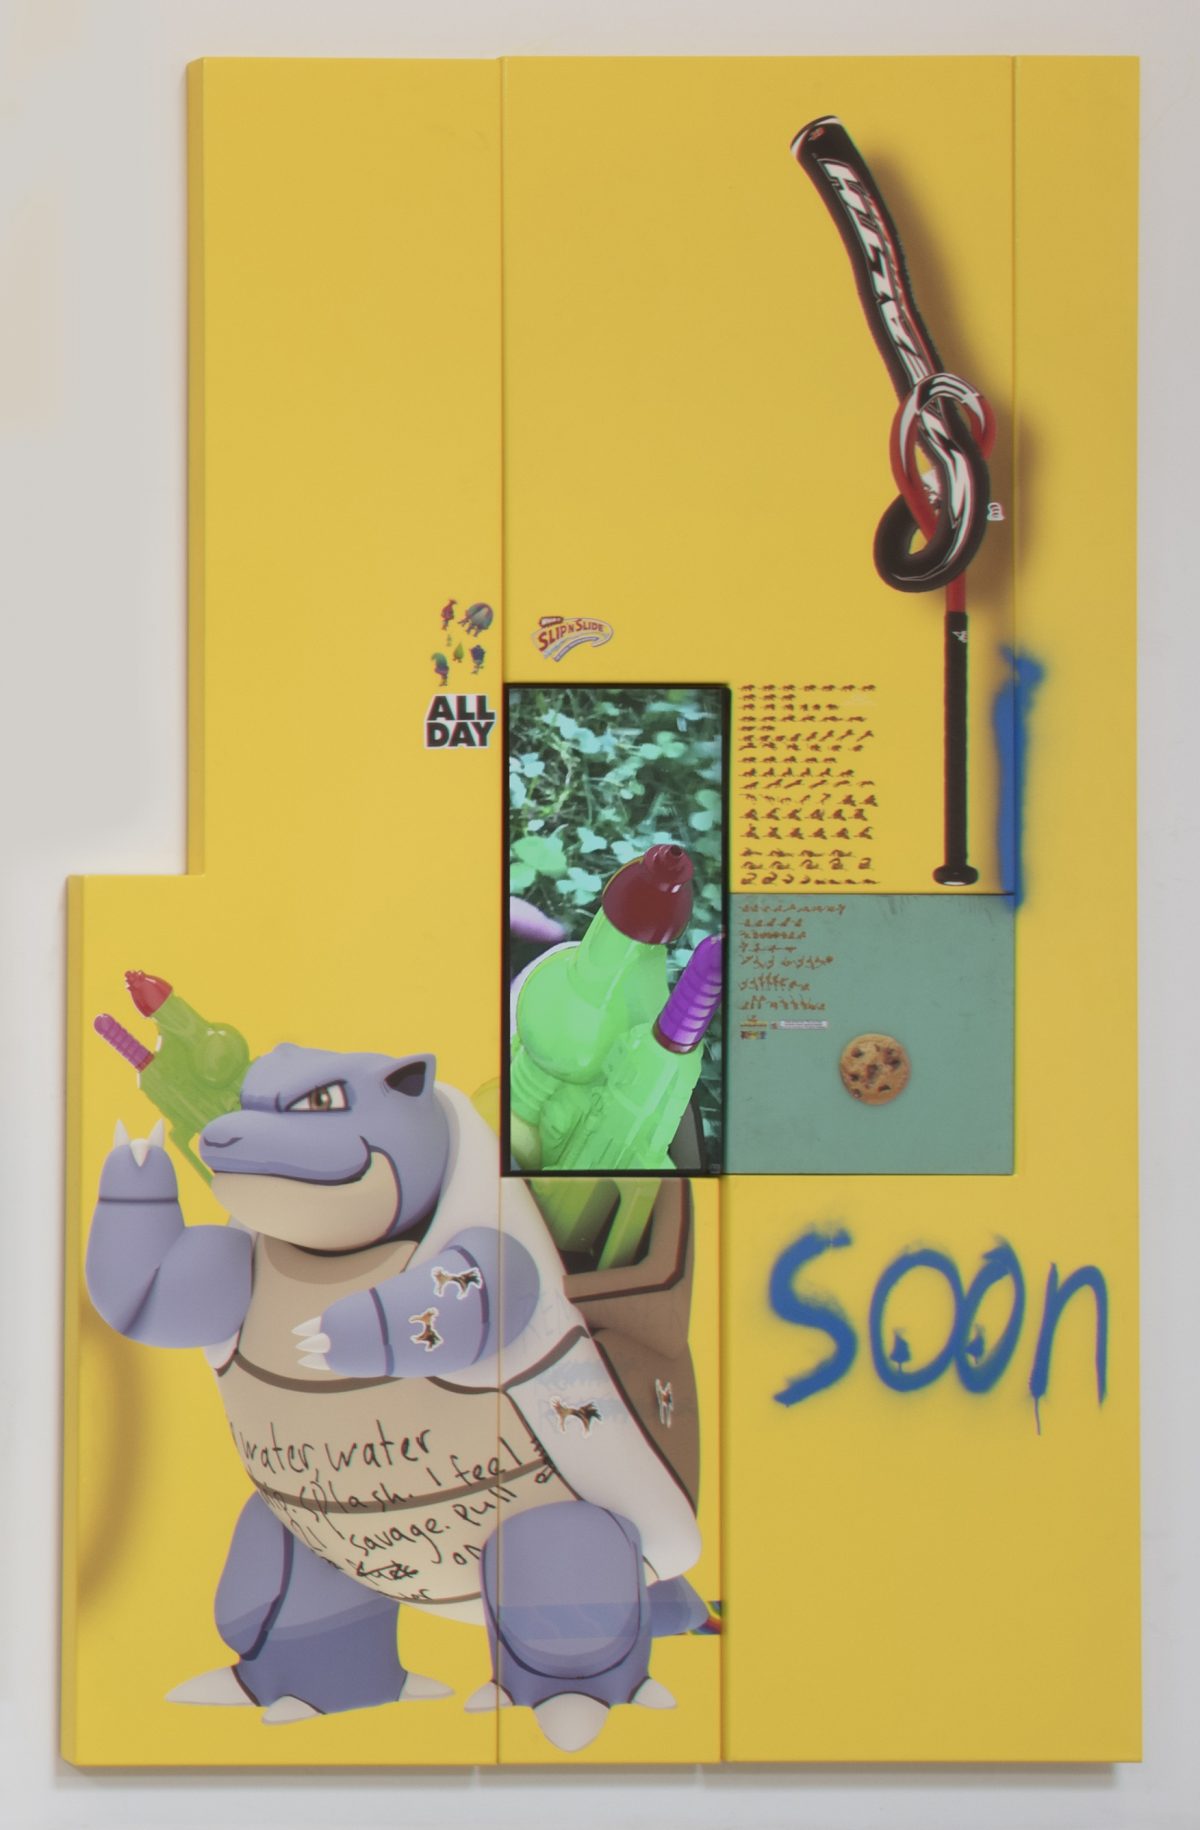 Yung Jake. <em>blastoise (with sim a and scar), 2017. UV print, spray paint, stickers, tape and ink on powder coated steel, found metal and monitor; video, 96 x 60 inches